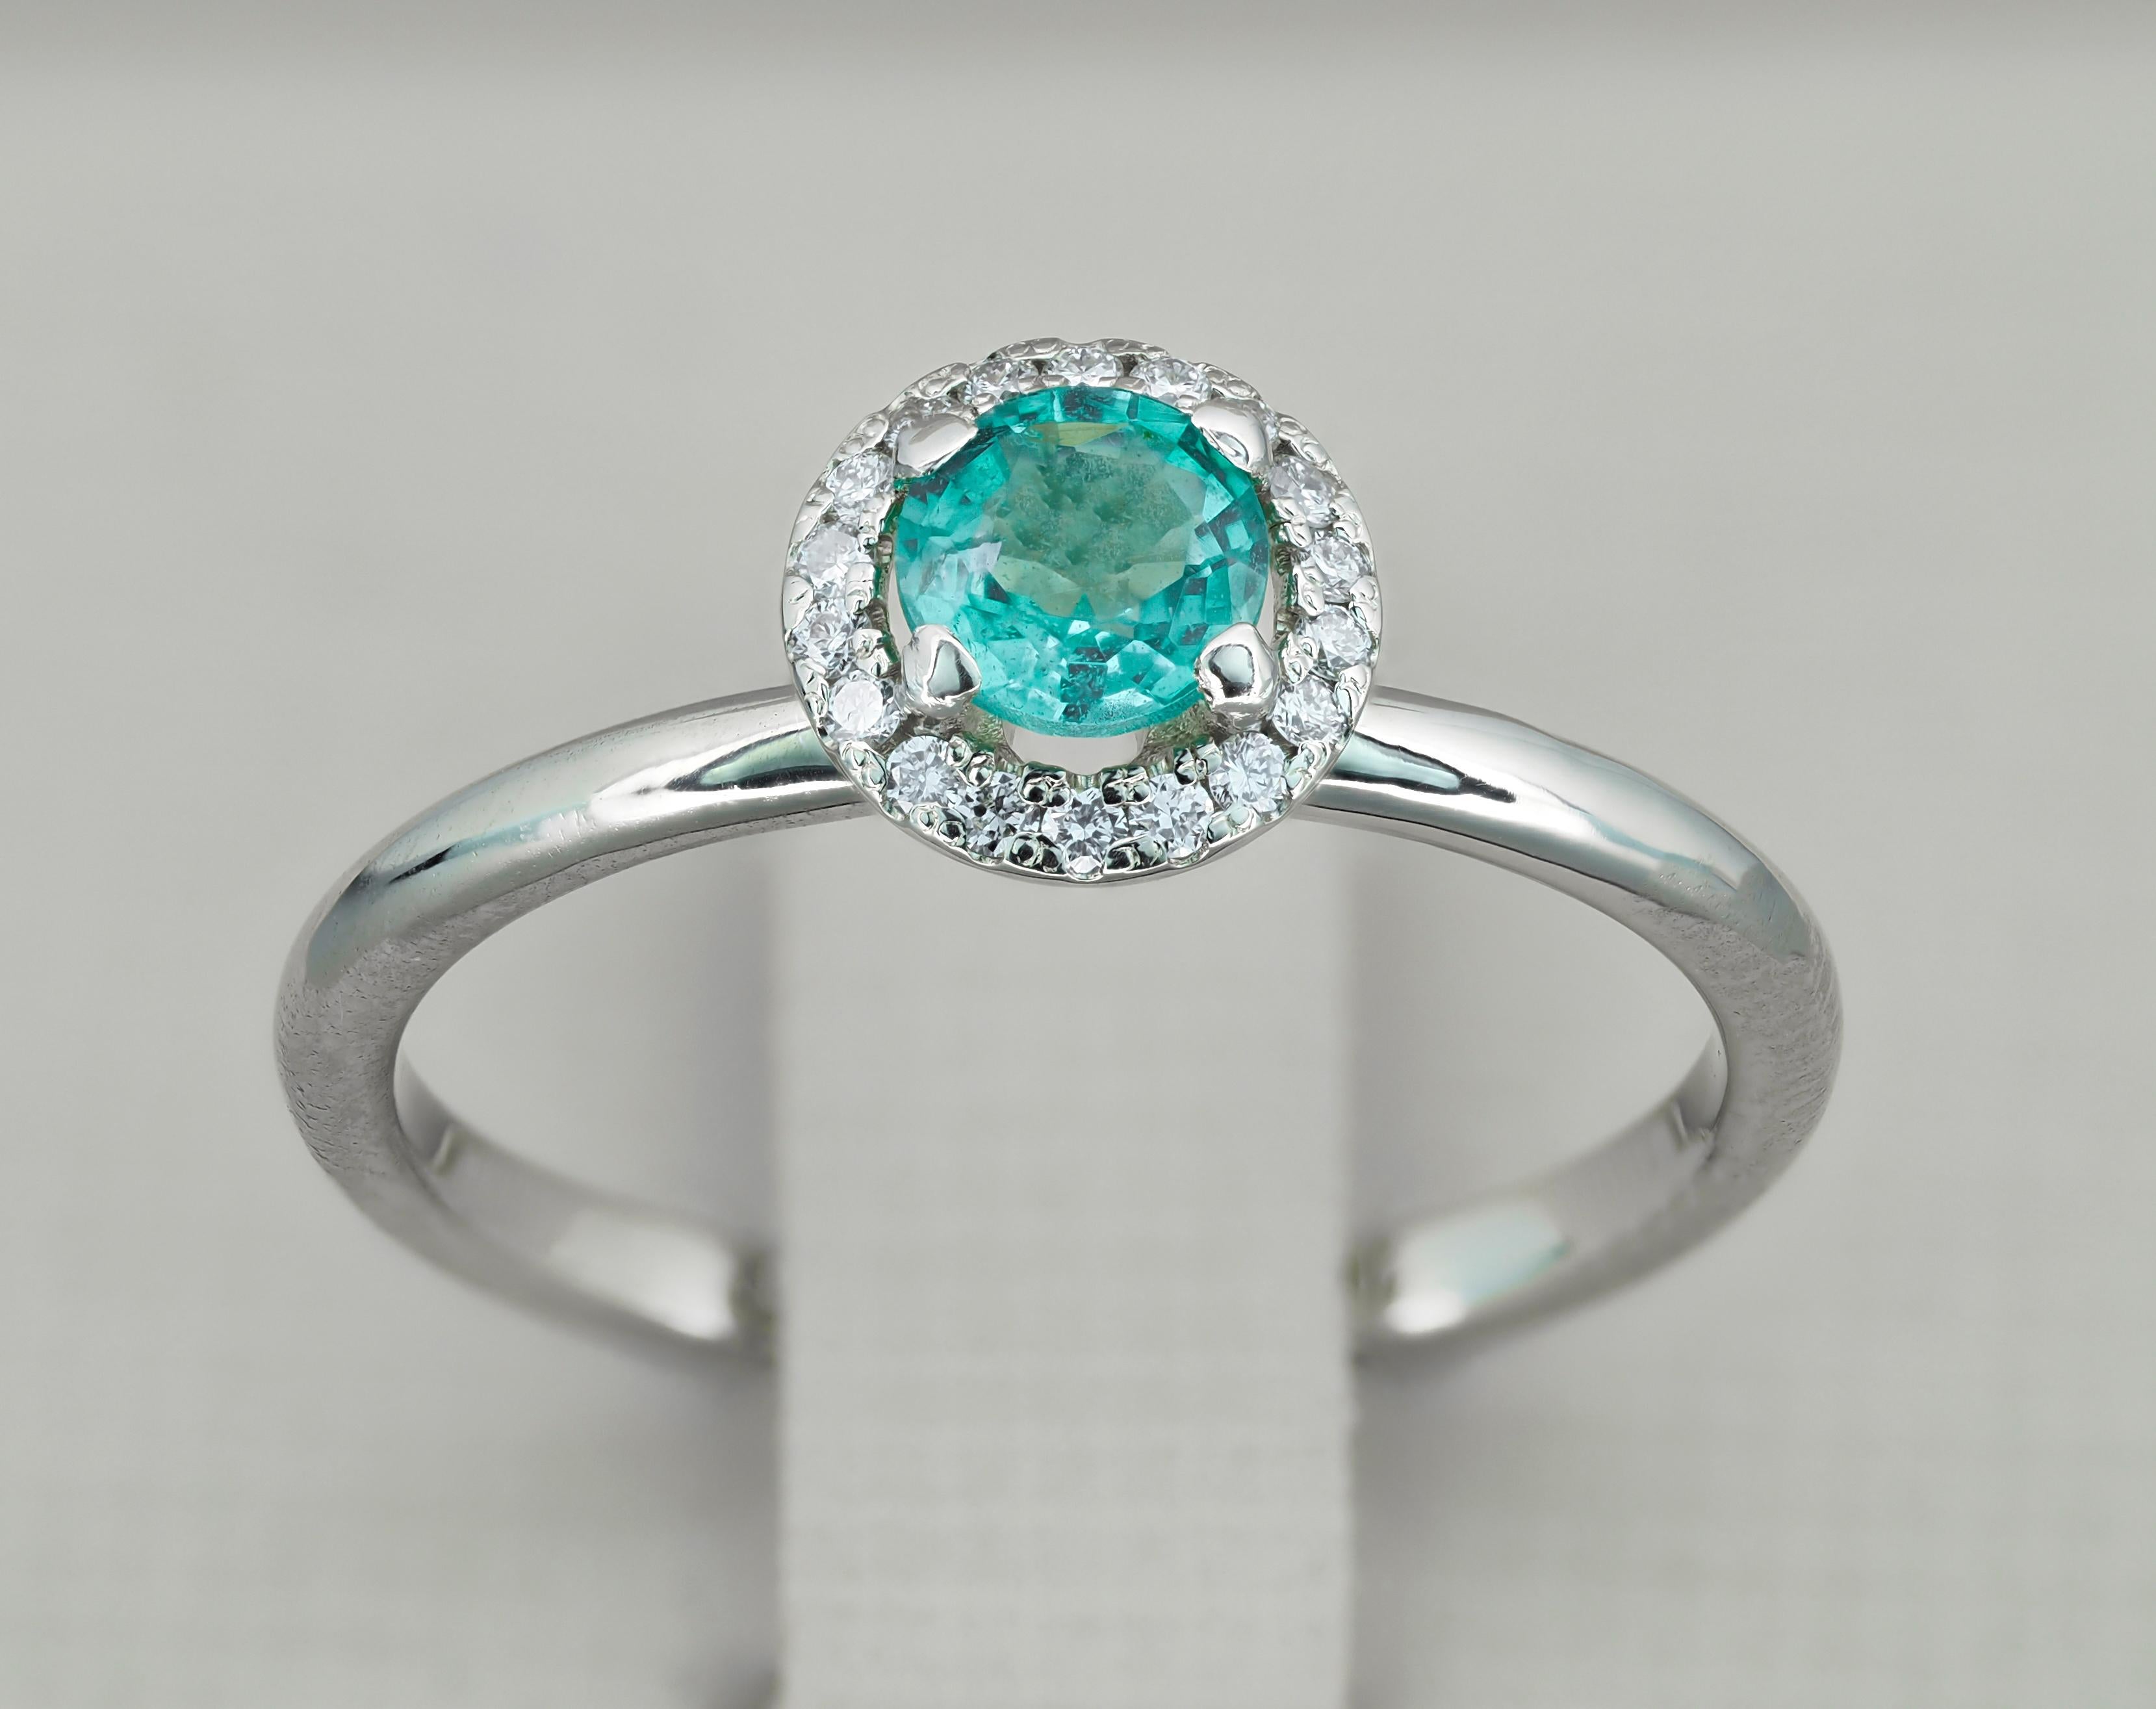 14 kt solid gold ring with natural emerald and diamonds. May birthstone.
Weight approx. 2.3 g.

Central stone: Natural emerald
Cut: Round
Weight: approx 0.50 ct.
Color: Green
Clarity: Transparent with inclusions
Side stones:
Diamonds: 0.10 ct total,